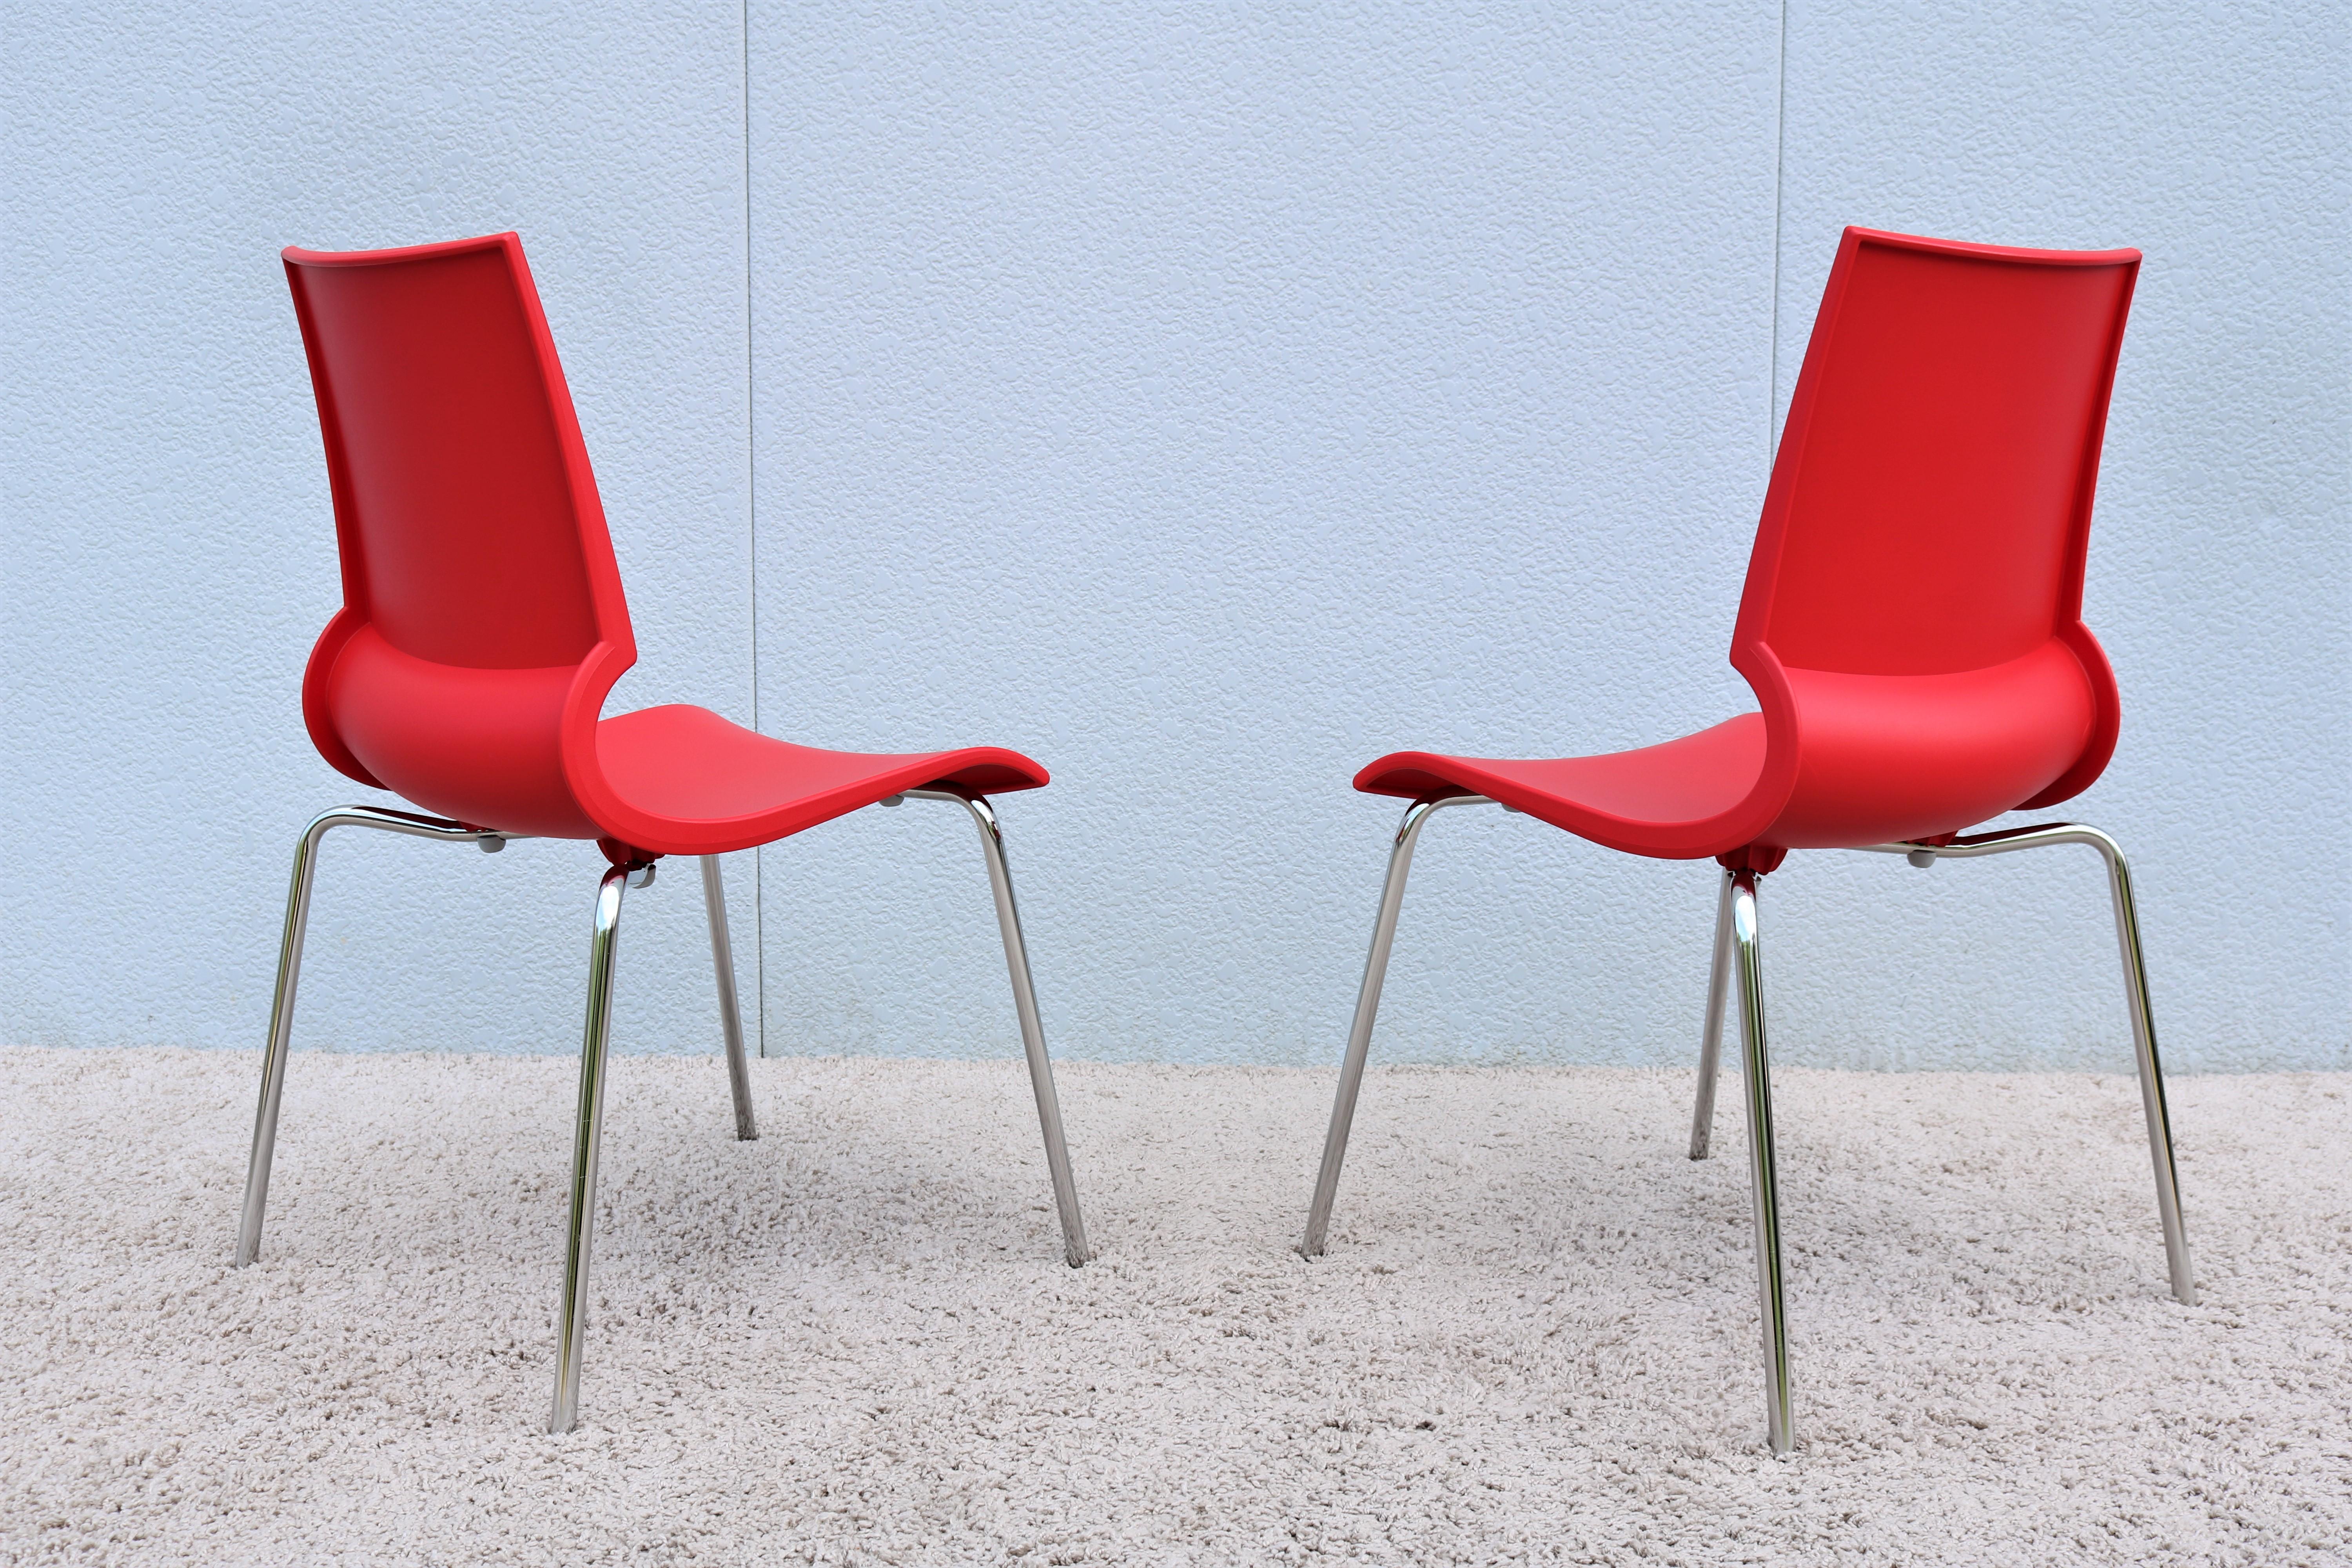 Molded Modern Italia MarCo Maran for Maxdesign Red Ricciolina Dining Chairs, a Pair For Sale